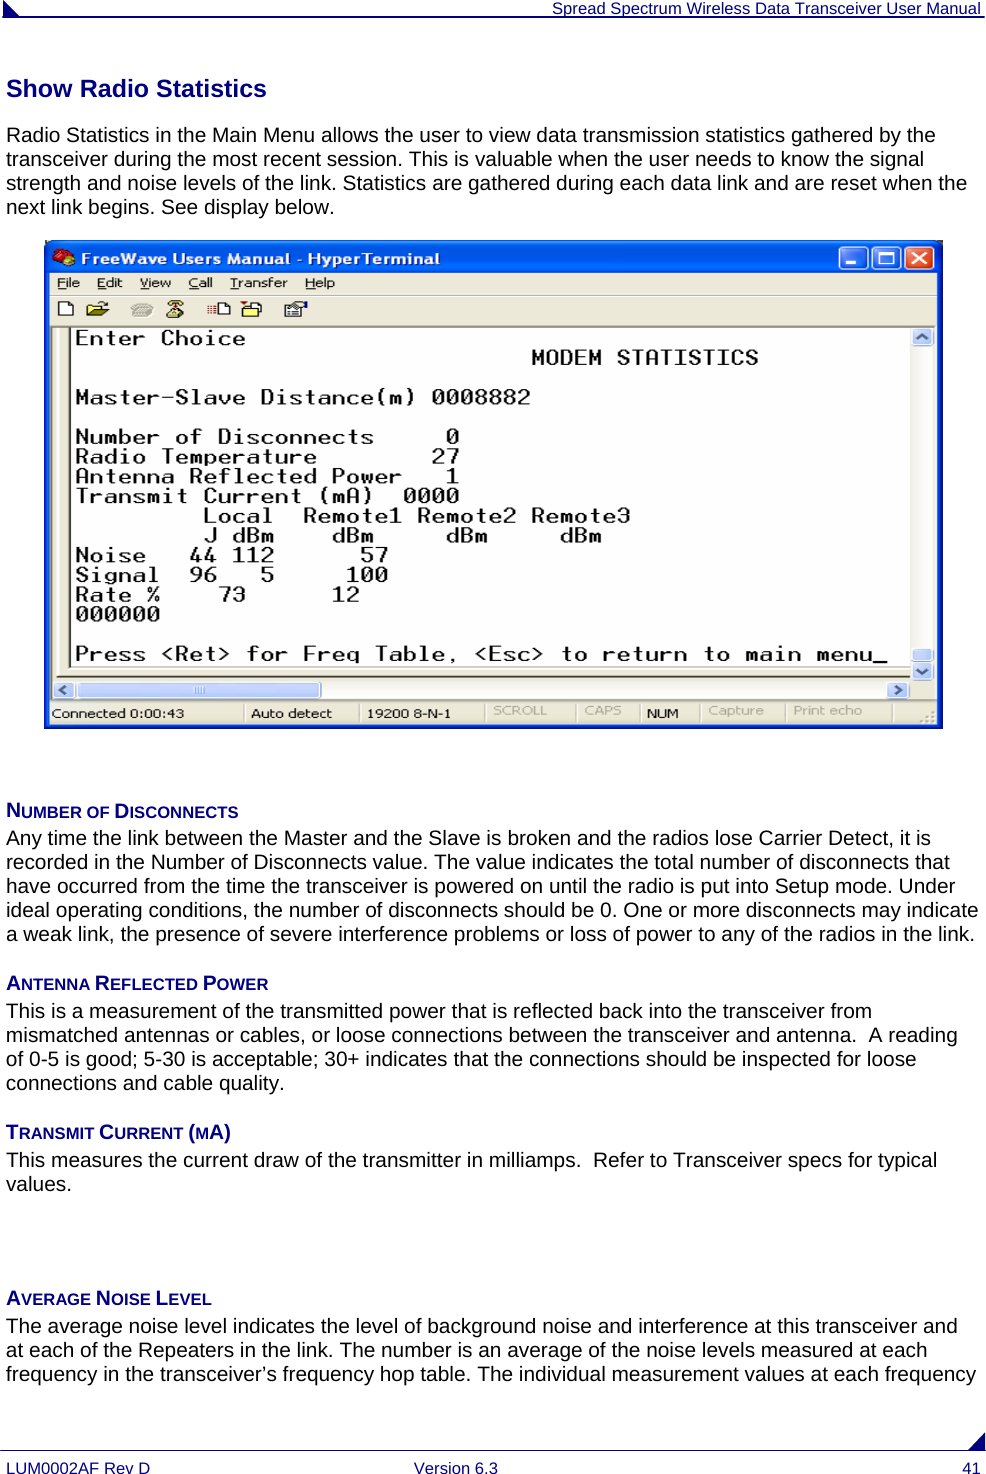  Spread Spectrum Wireless Data Transceiver User Manual LUM0002AF Rev D  Version 6.3  41 Show Radio Statistics  Radio Statistics in the Main Menu allows the user to view data transmission statistics gathered by the transceiver during the most recent session. This is valuable when the user needs to know the signal strength and noise levels of the link. Statistics are gathered during each data link and are reset when the next link begins. See display below.   NUMBER OF DISCONNECTS Any time the link between the Master and the Slave is broken and the radios lose Carrier Detect, it is recorded in the Number of Disconnects value. The value indicates the total number of disconnects that have occurred from the time the transceiver is powered on until the radio is put into Setup mode. Under ideal operating conditions, the number of disconnects should be 0. One or more disconnects may indicate a weak link, the presence of severe interference problems or loss of power to any of the radios in the link. ANTENNA REFLECTED POWER This is a measurement of the transmitted power that is reflected back into the transceiver from mismatched antennas or cables, or loose connections between the transceiver and antenna.  A reading of 0-5 is good; 5-30 is acceptable; 30+ indicates that the connections should be inspected for loose connections and cable quality. TRANSMIT CURRENT (MA) This measures the current draw of the transmitter in milliamps.  Refer to Transceiver specs for typical values.   AVERAGE NOISE LEVEL The average noise level indicates the level of background noise and interference at this transceiver and at each of the Repeaters in the link. The number is an average of the noise levels measured at each frequency in the transceiver’s frequency hop table. The individual measurement values at each frequency 